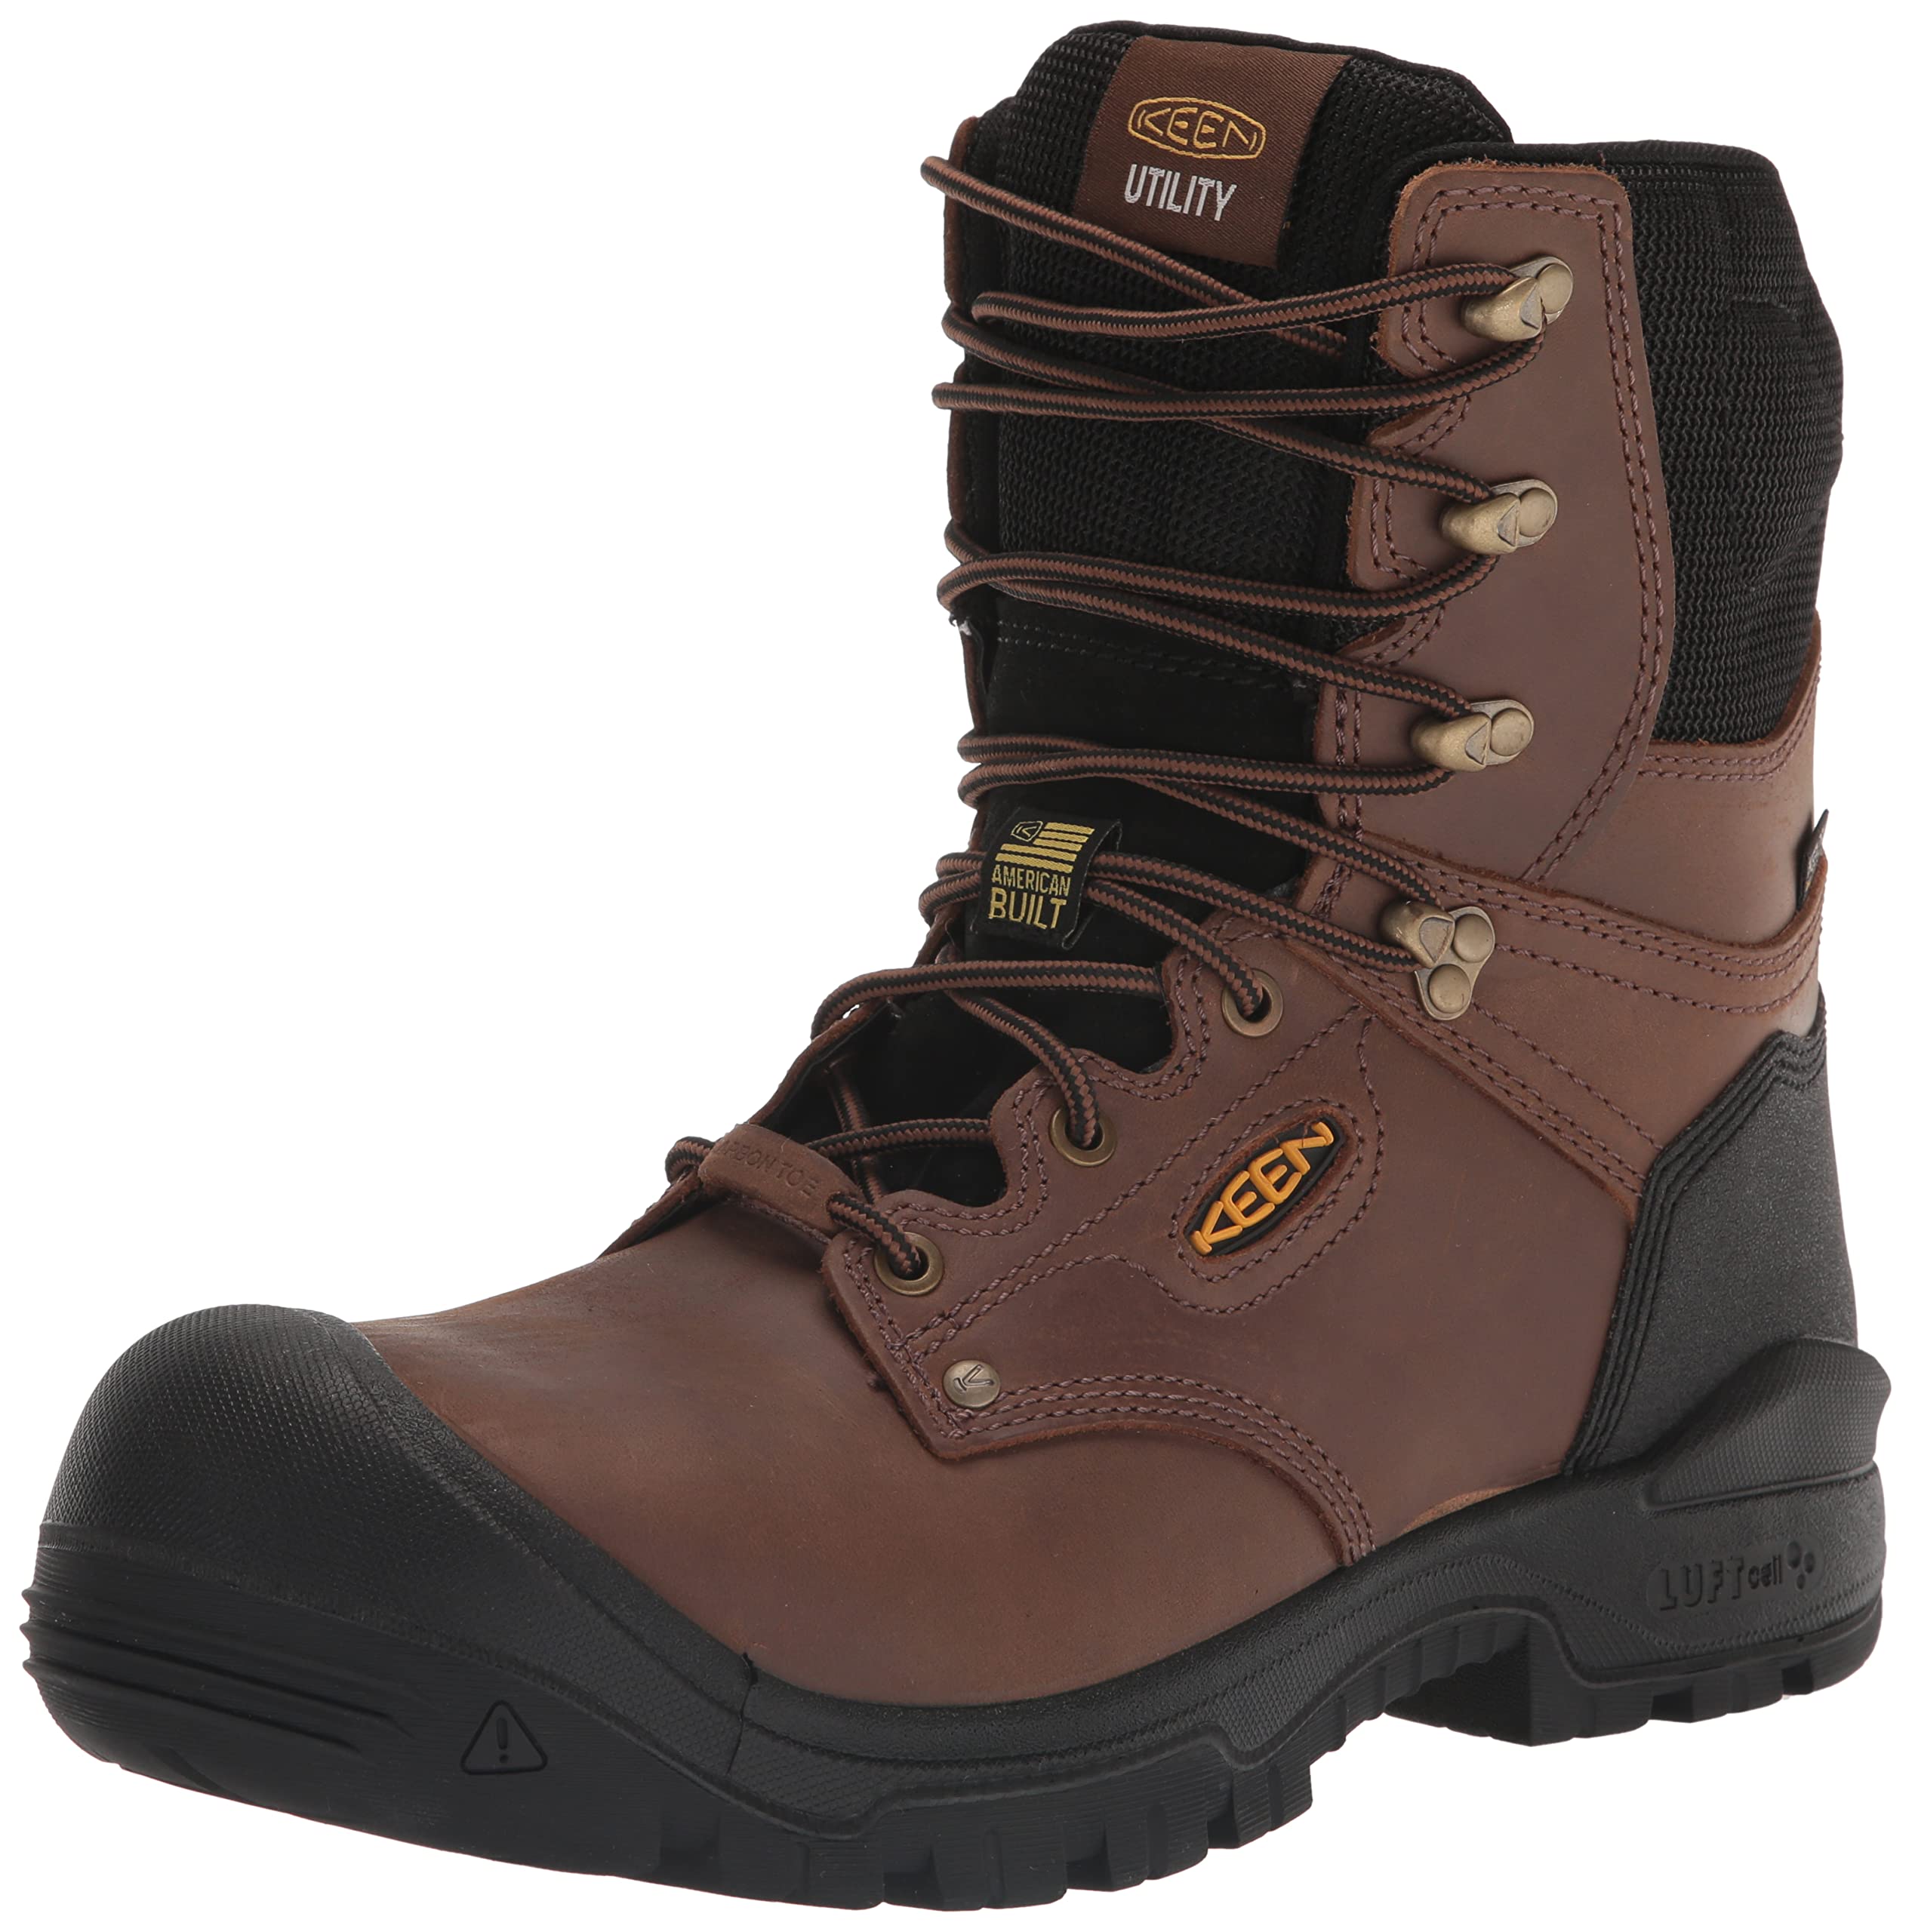 KEEN Utility Independence, Men's, Comp Toe, EH, WP, 8 Inch, Work Boot